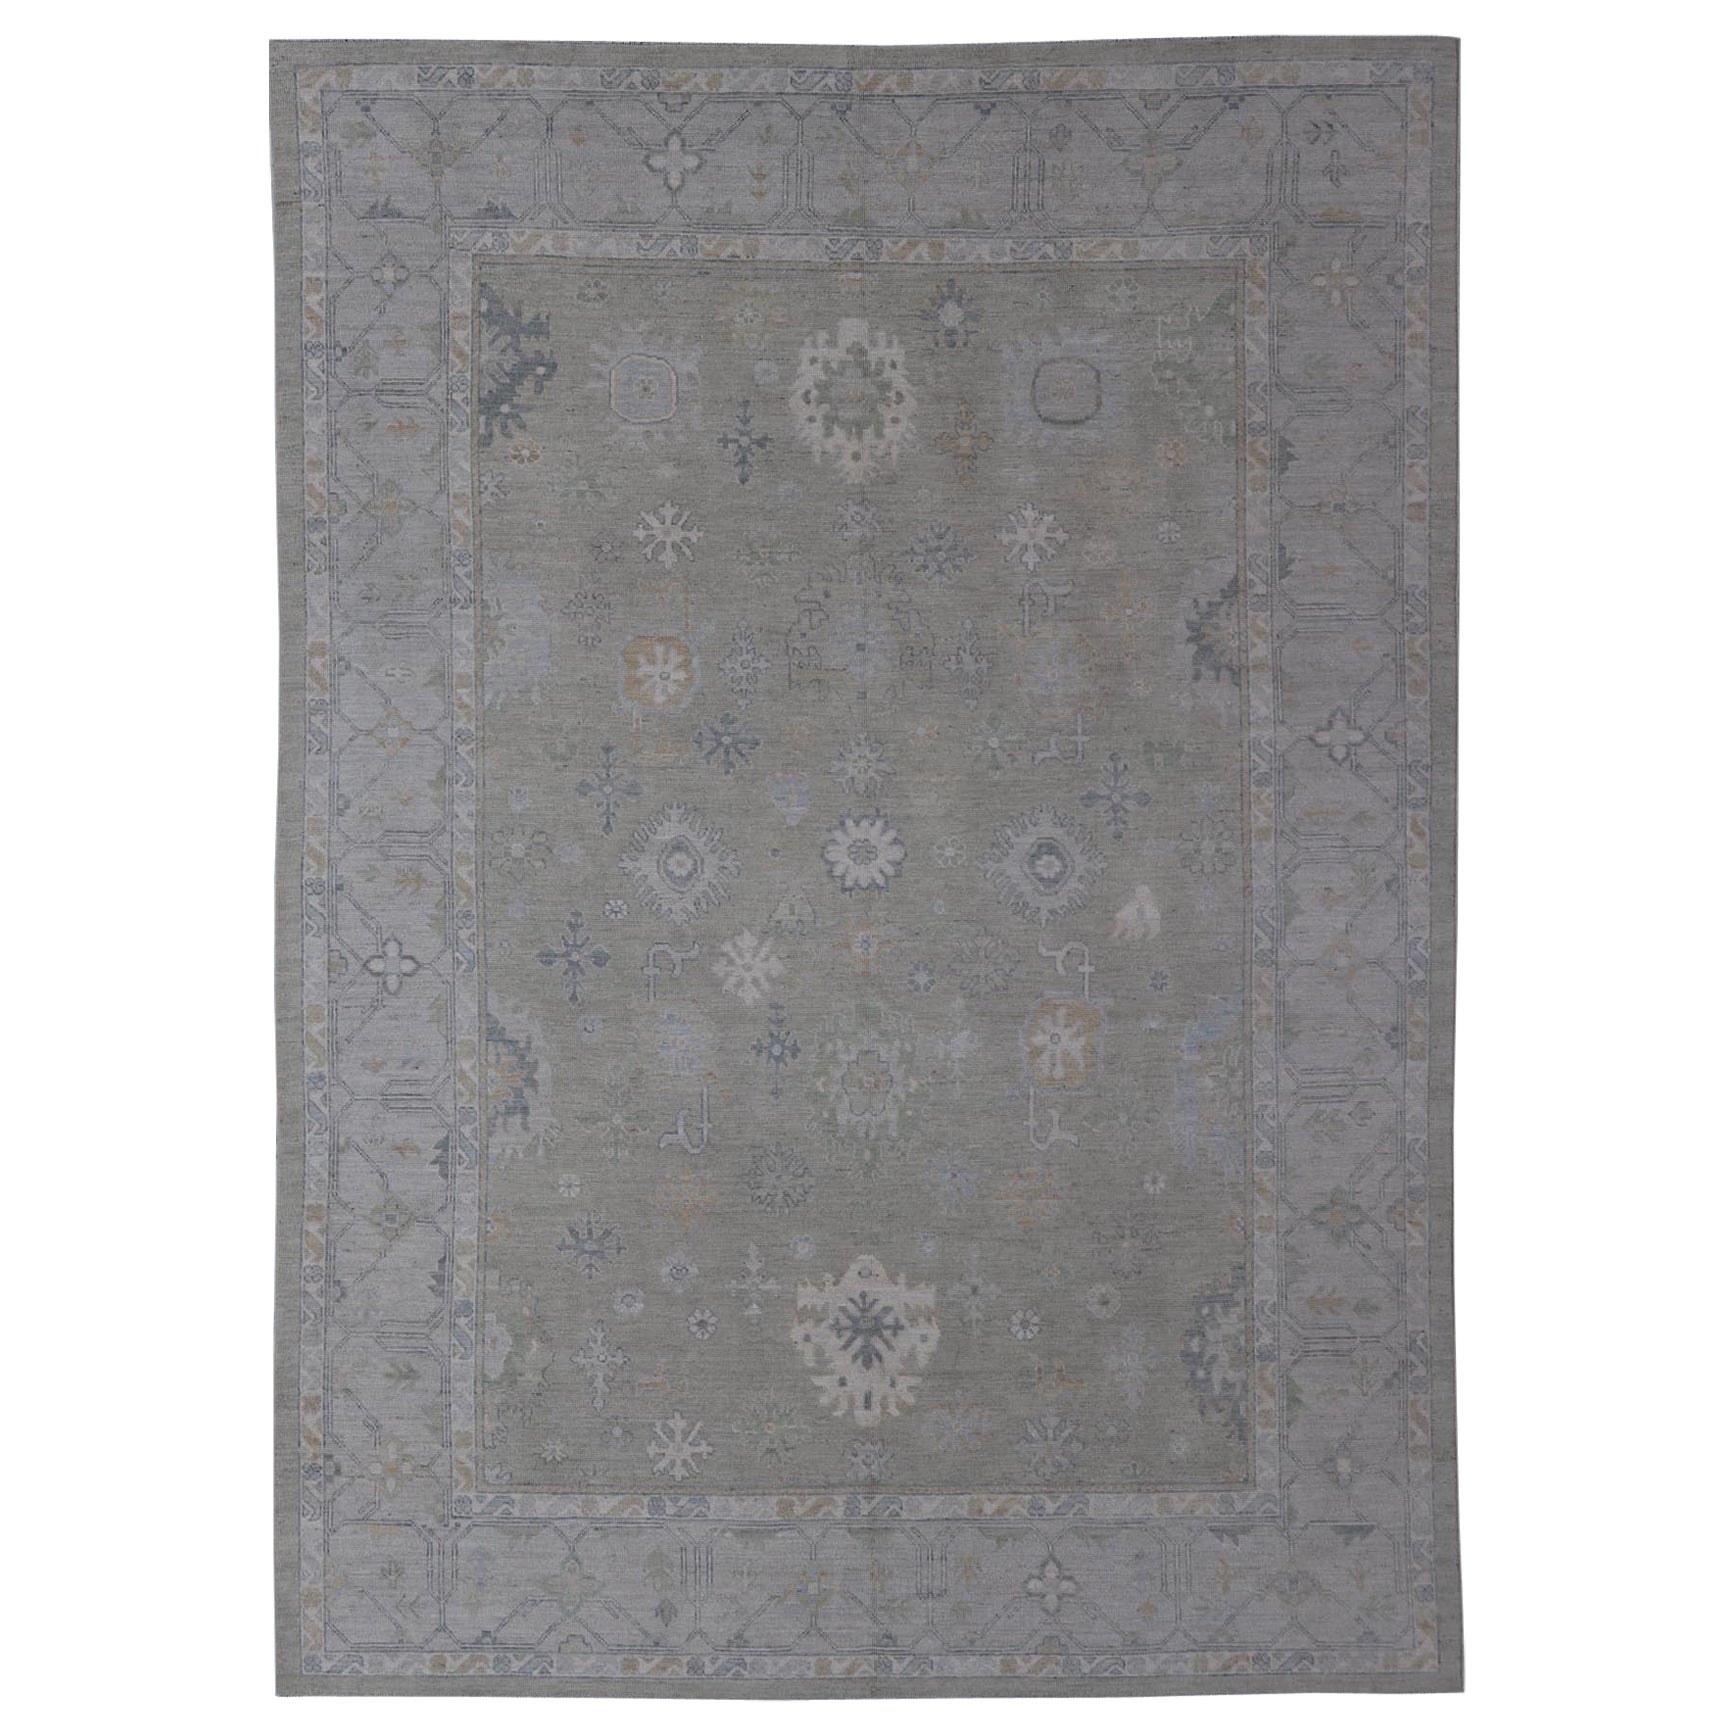 Hand-Knotted Transitional Neutral Oushak Rug in Light Gray, Light Blue, Green